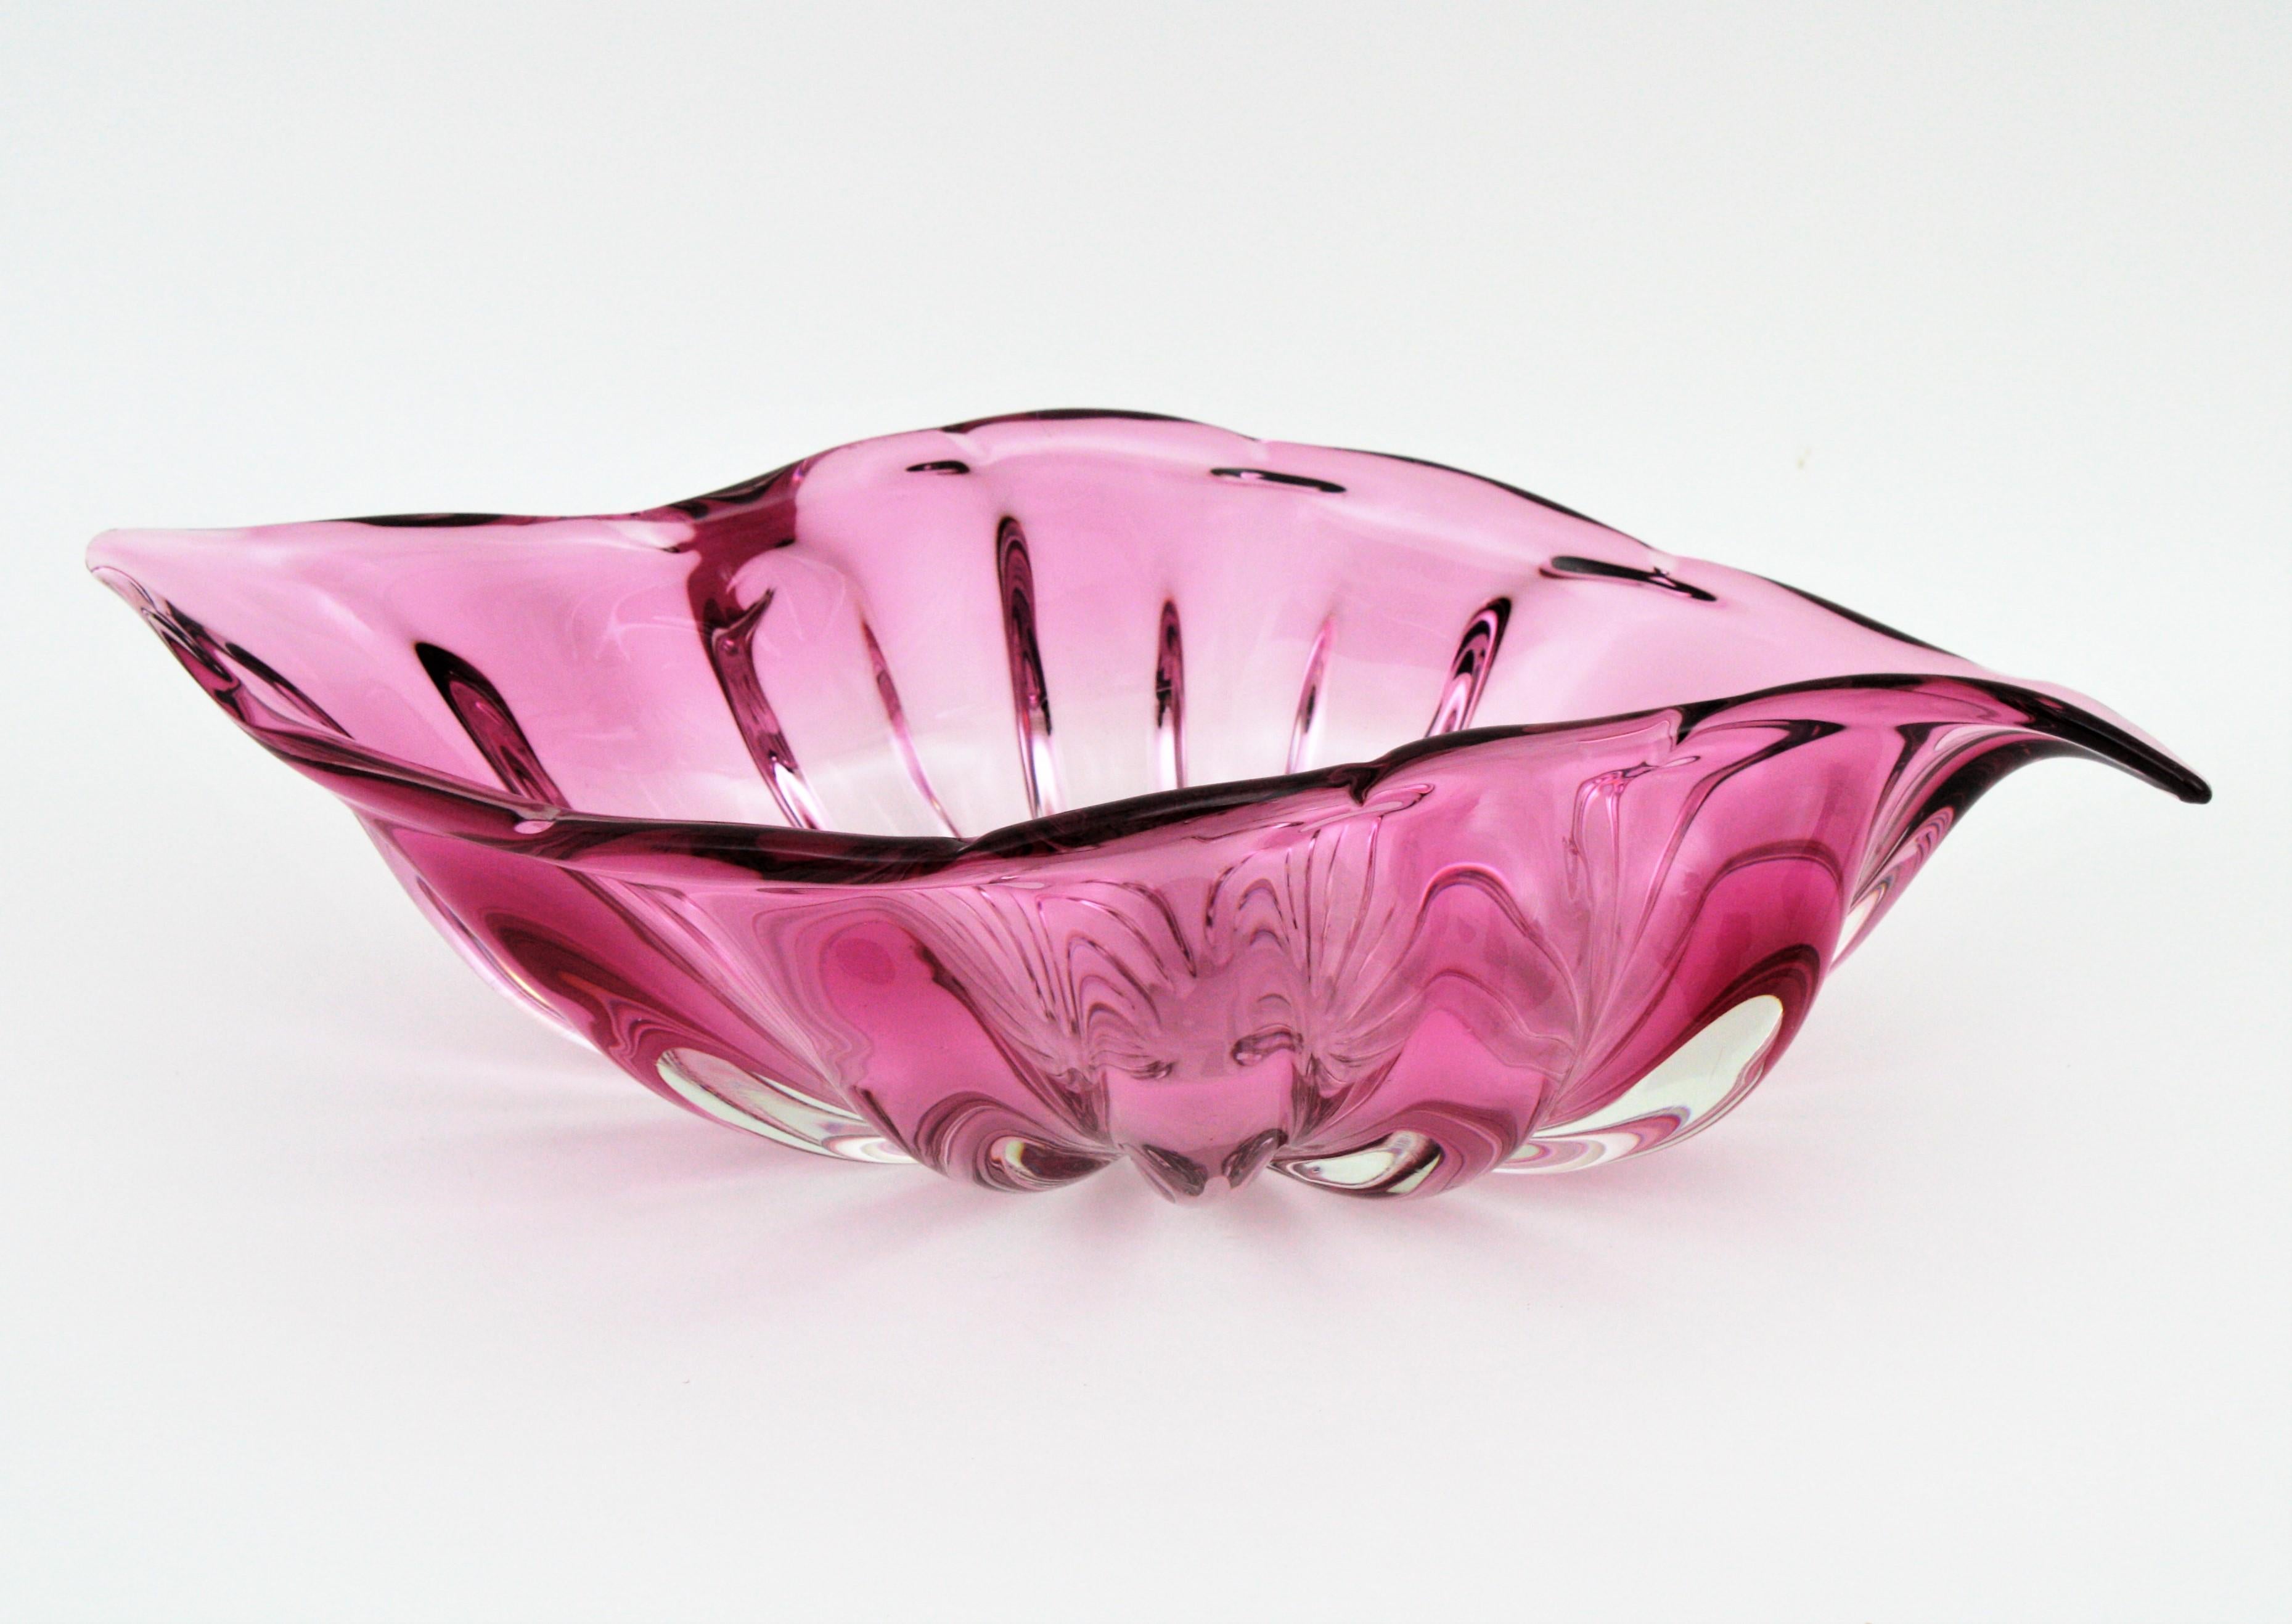 Hand-Crafted Alfredo Barbini Murano Sommerso Pink Art Glass Centerpiece Decorative Bowl For Sale